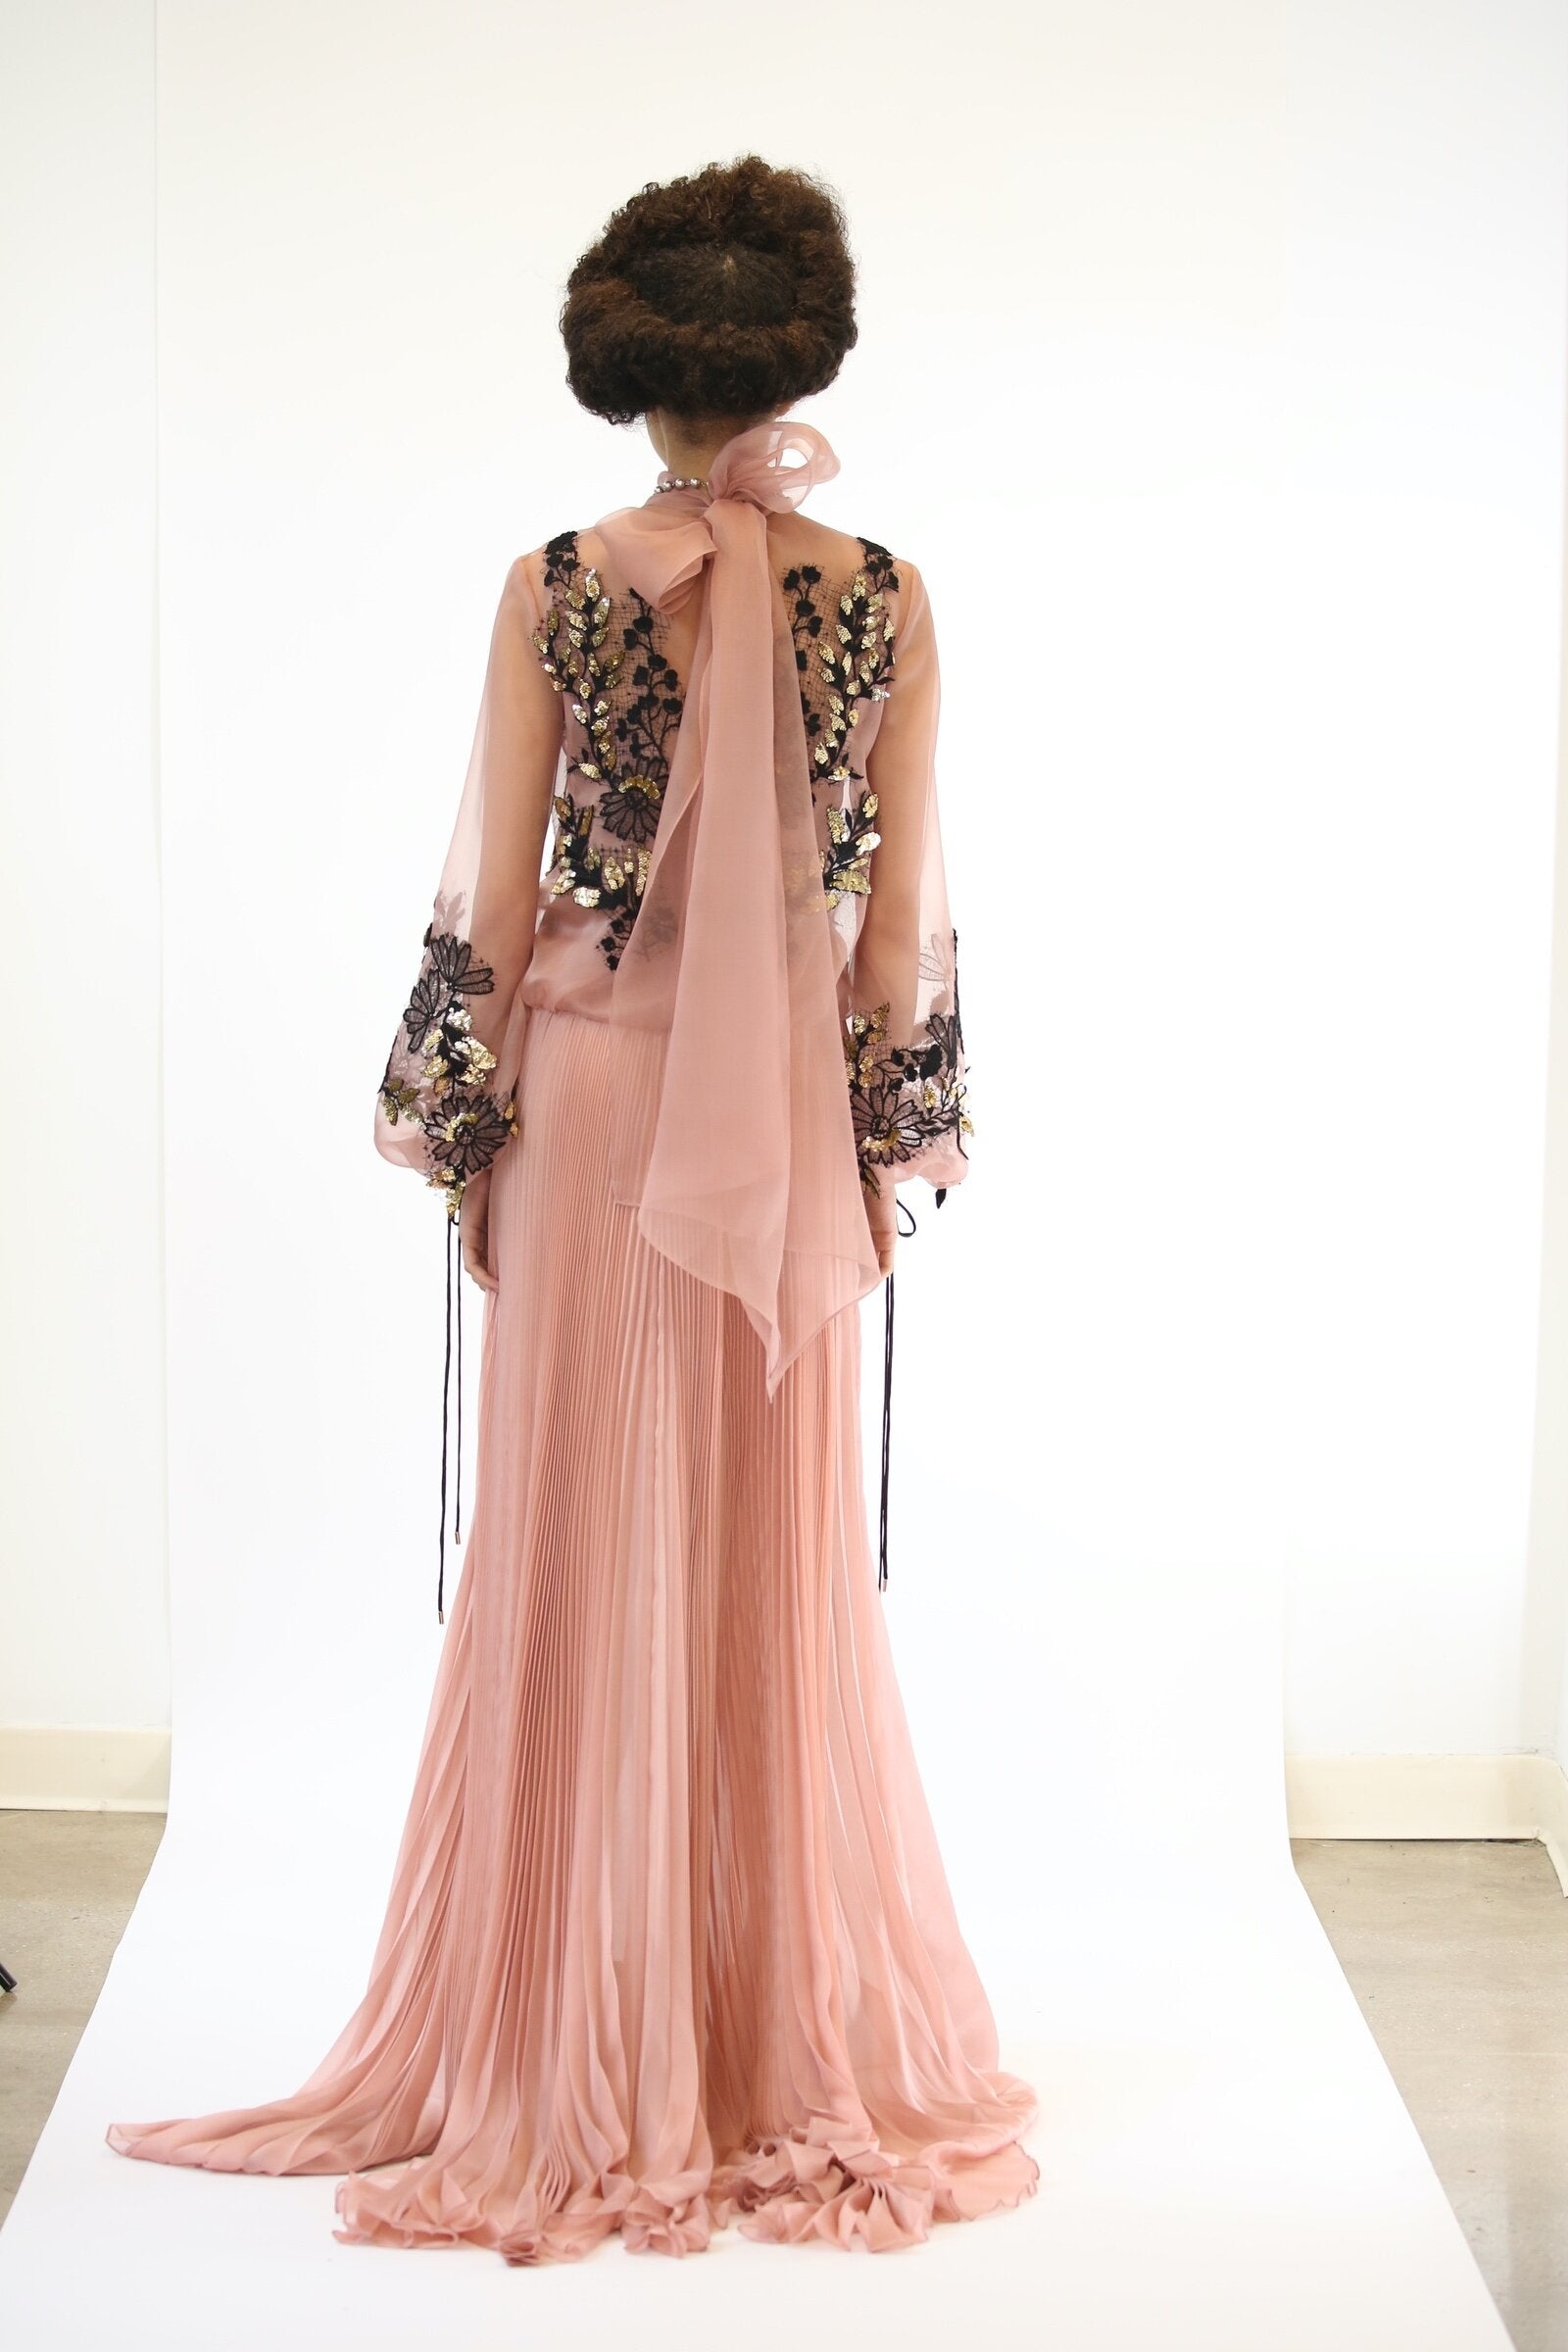 Silk Organza And Pleated Satin Chiffon Gown With Gold Crystal Embroidery On Lace Appliques 3